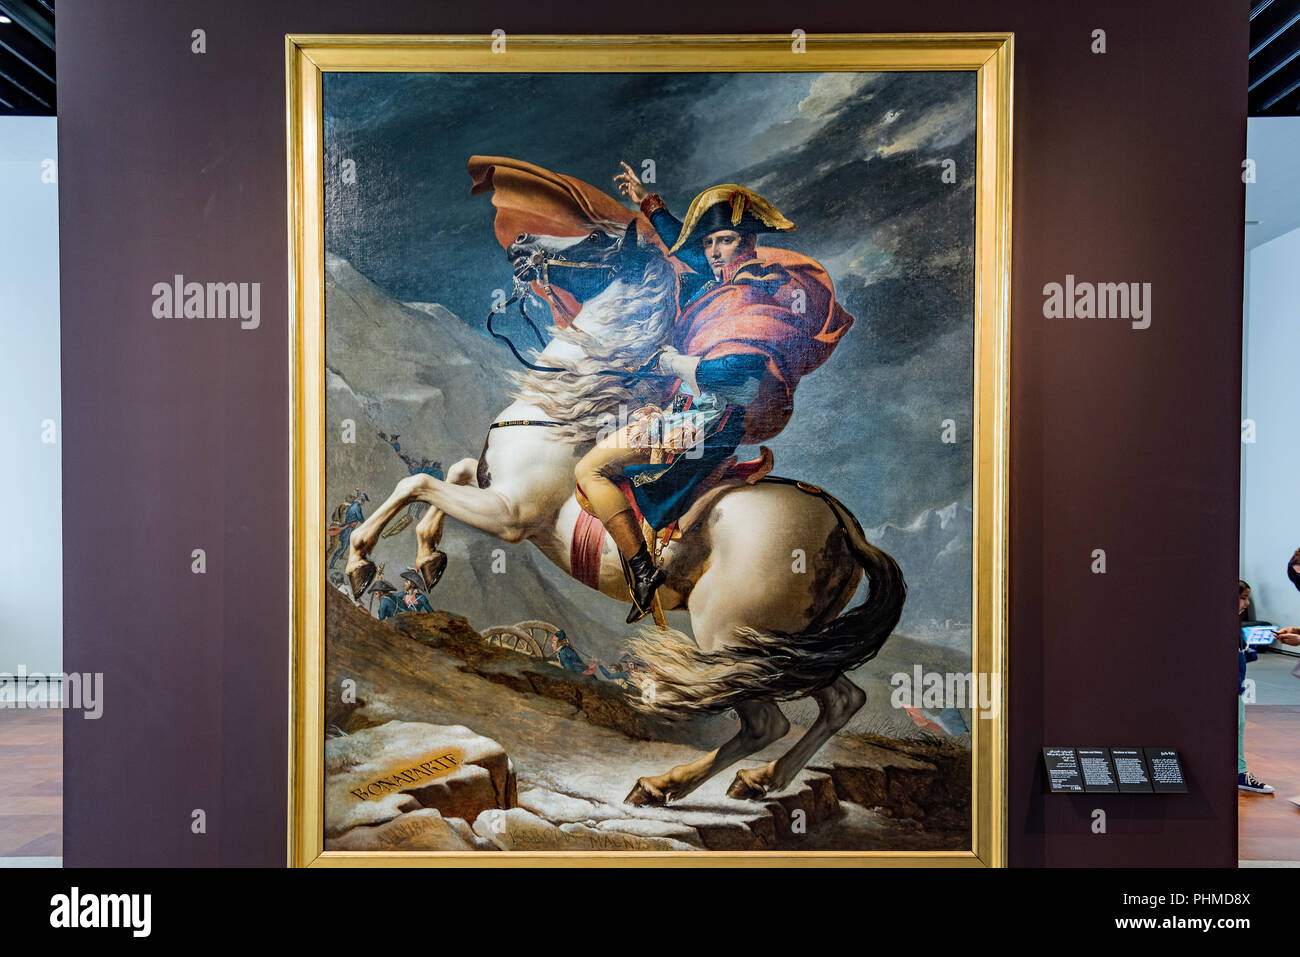 Napoleon Crossing the Alps as shown in the Louvre Abu Dhabi, U.A.E. Stock Photo